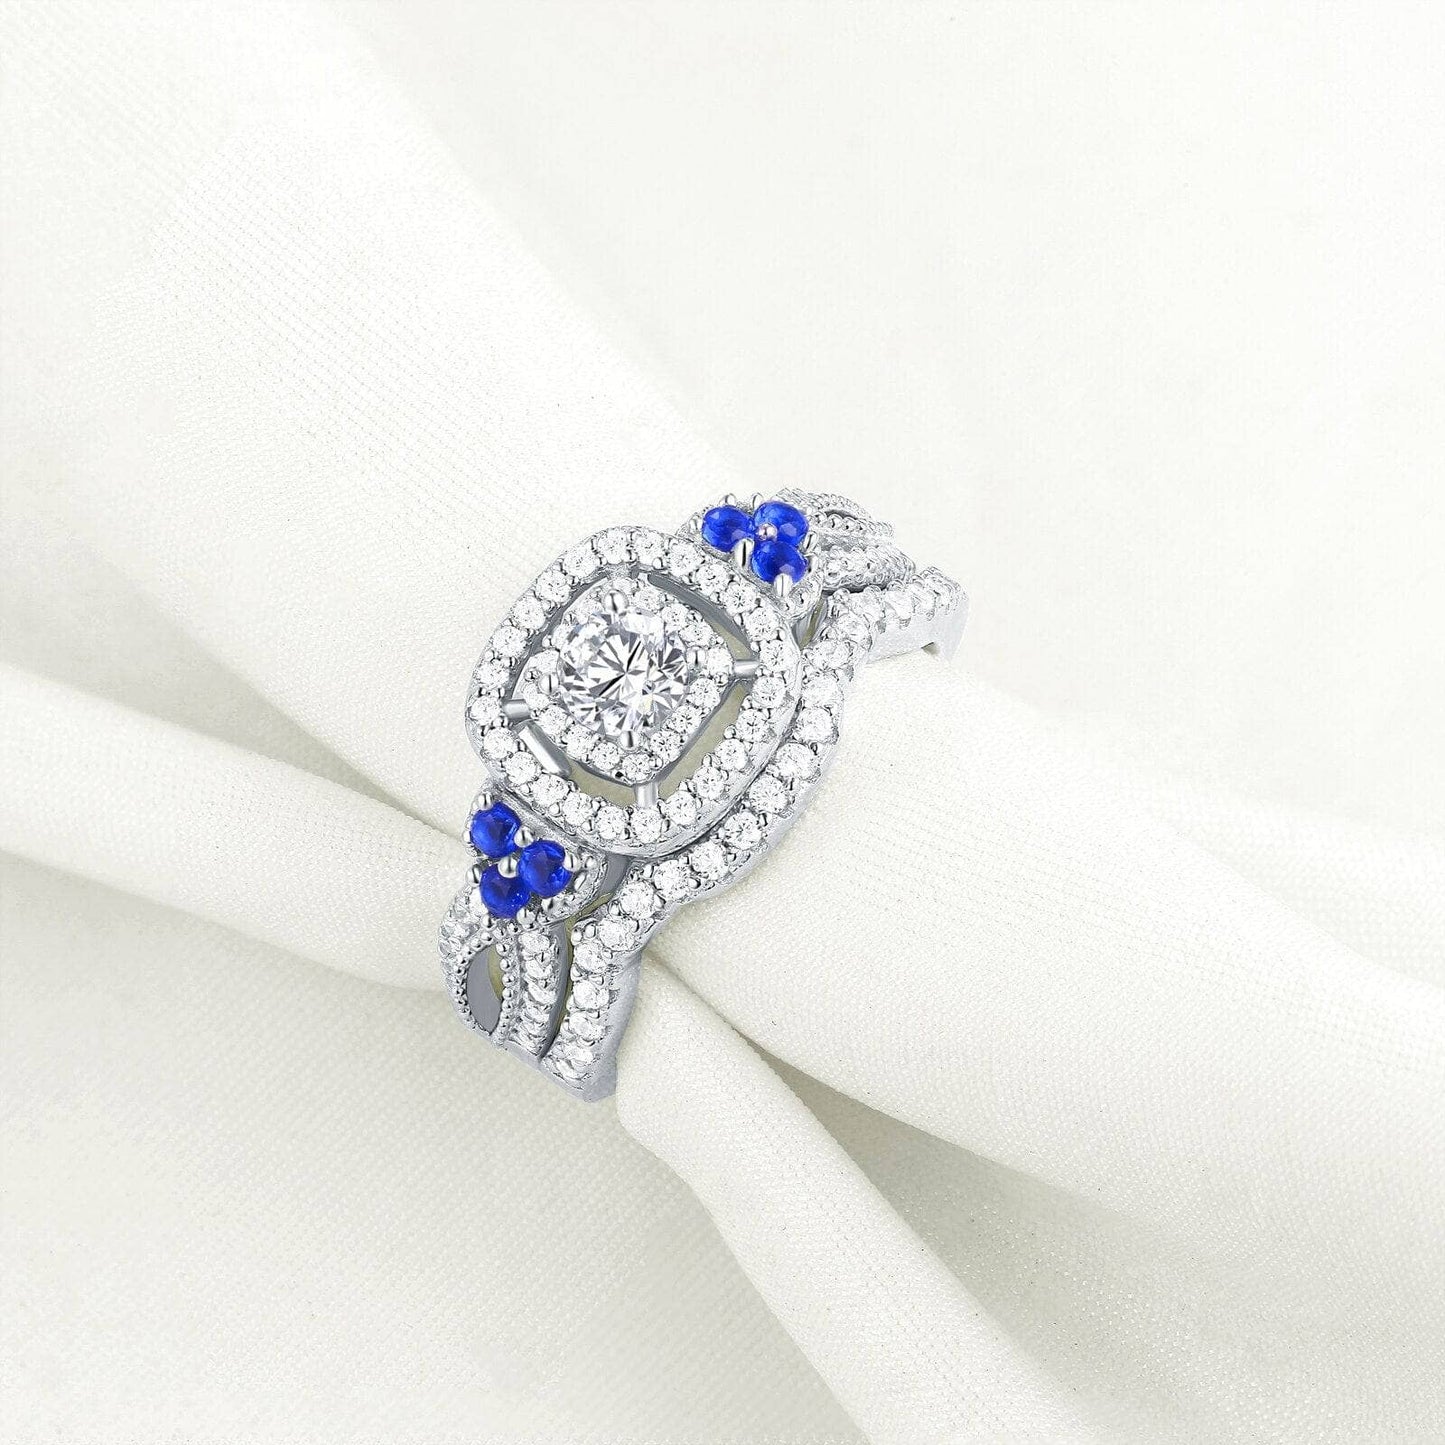 2Pcs 925 Sterling Silver 1.5 Ct White Blue Cubic Zircon Ring